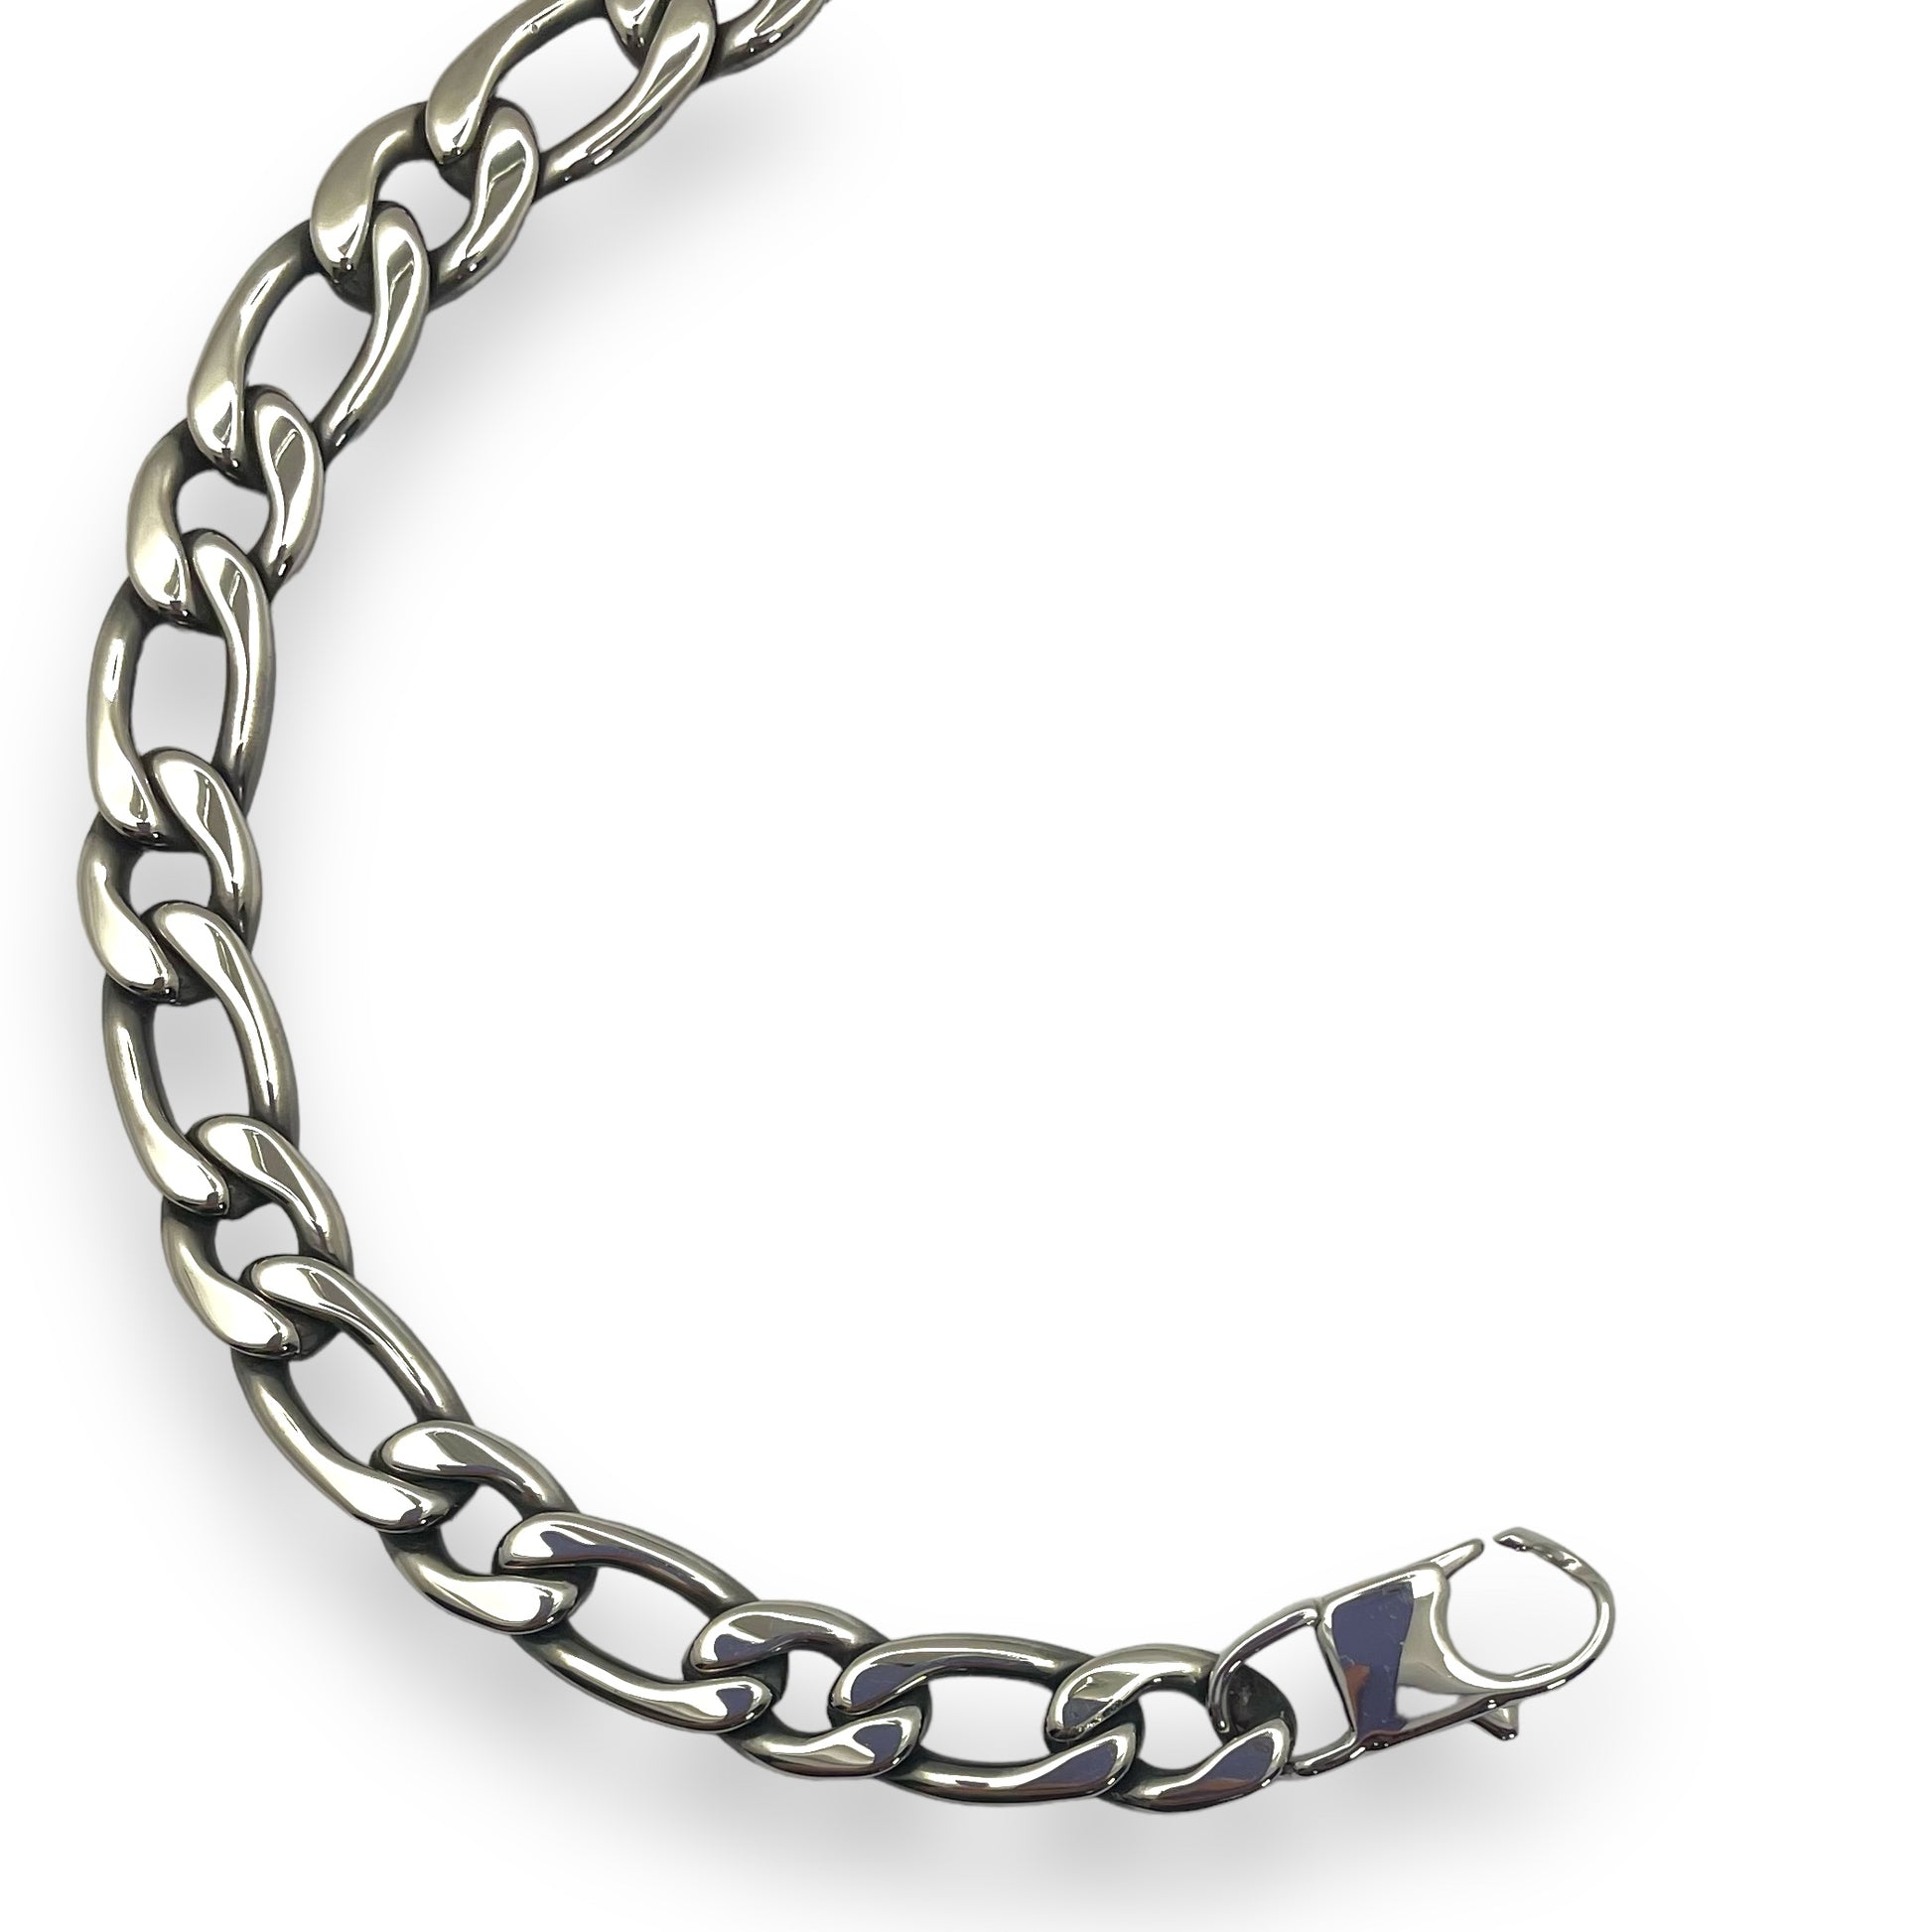 Bracelet in Surgical Stainless Steel